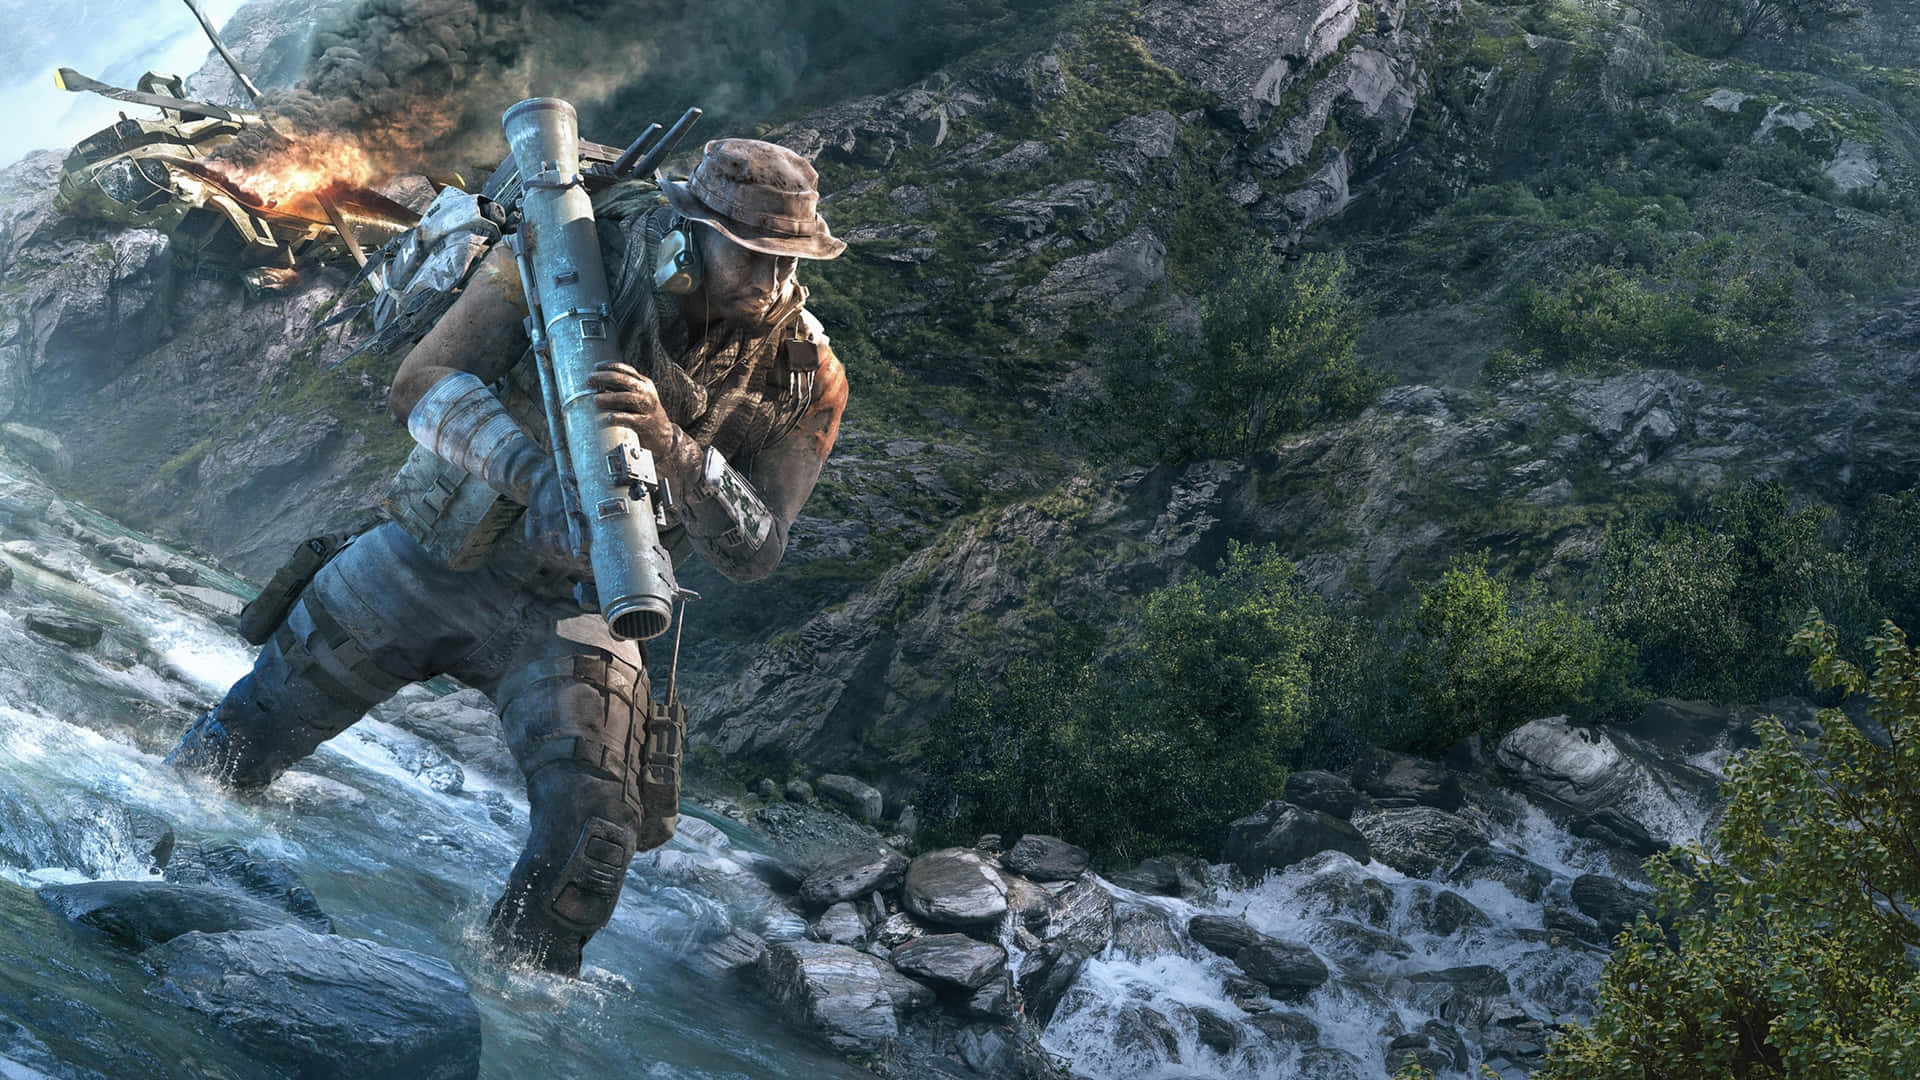 Join the Ghosts and take on the toughest missions Wallpaper